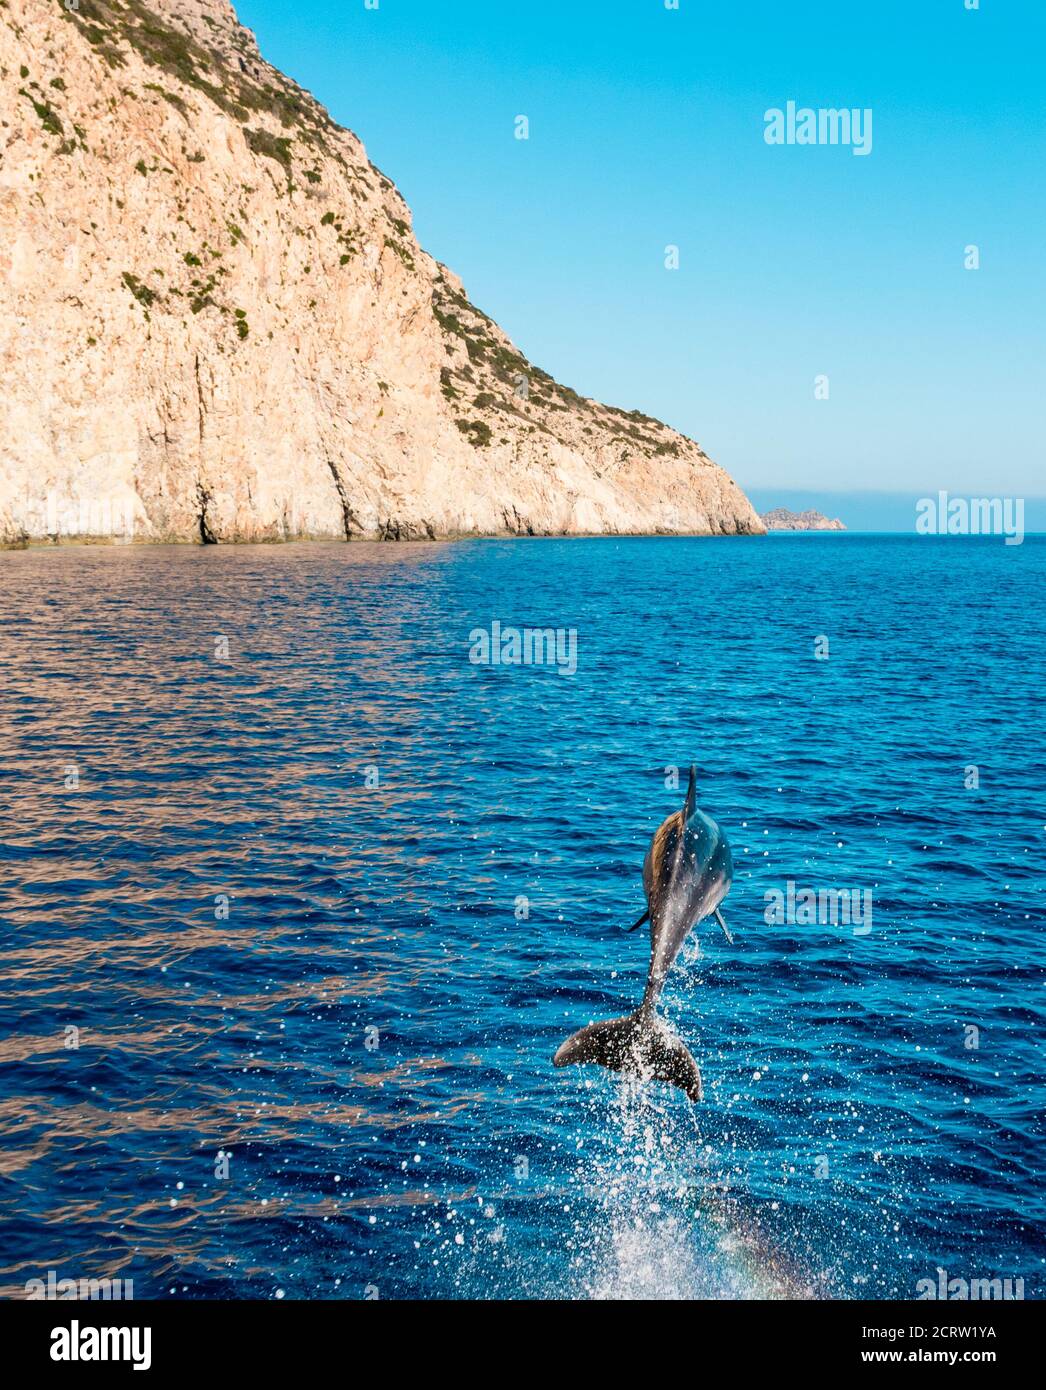 Dolphin jumping out of water on Karpathos Island, Greece Stock Photo